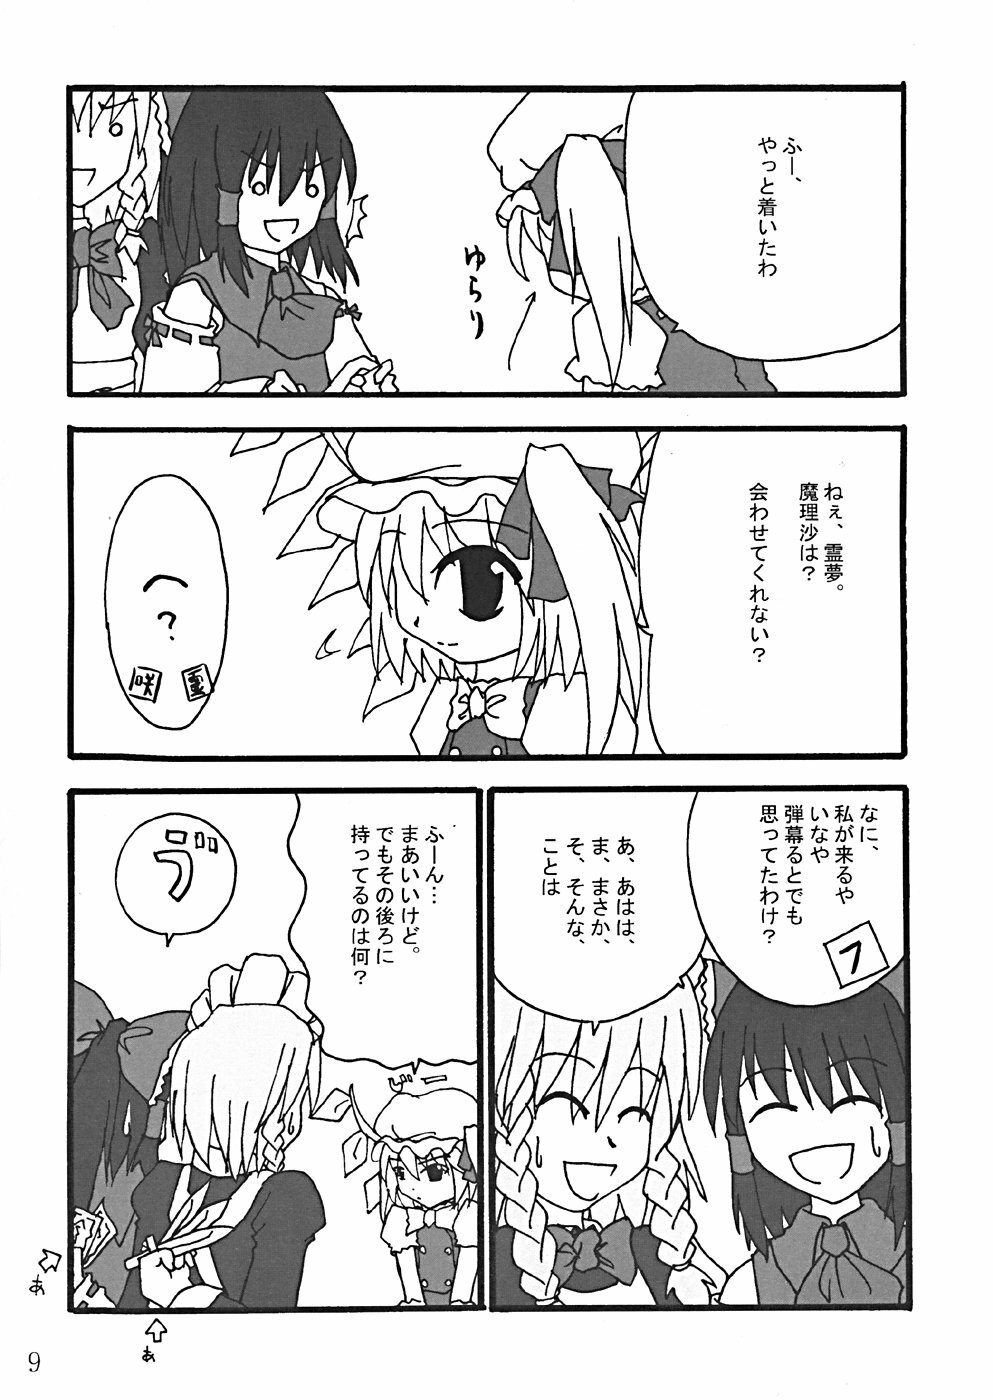 (CR35) [LemonMaiden (Various)] Oukasai ～ Cherry Point MAX (Touhou Project) page 12 full